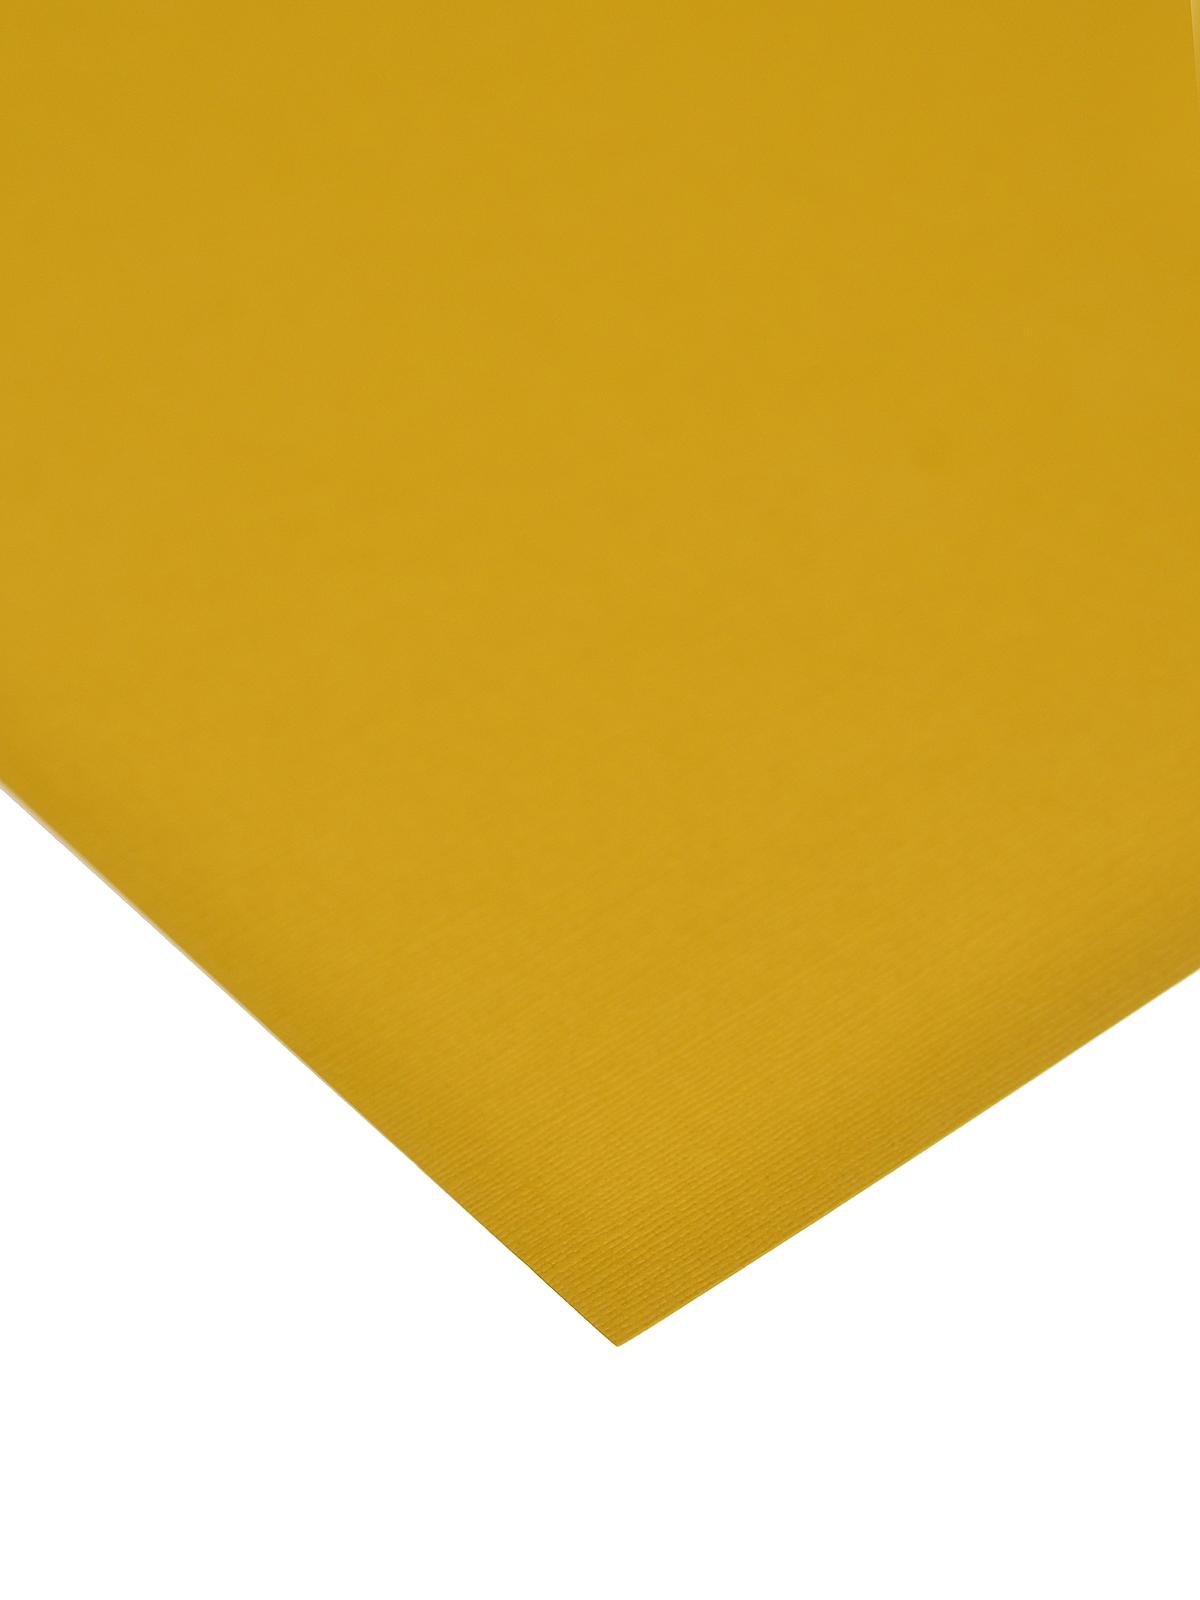 80 Lb. Canvas 8.5 In. X 11 In. Sheet Goldenrod